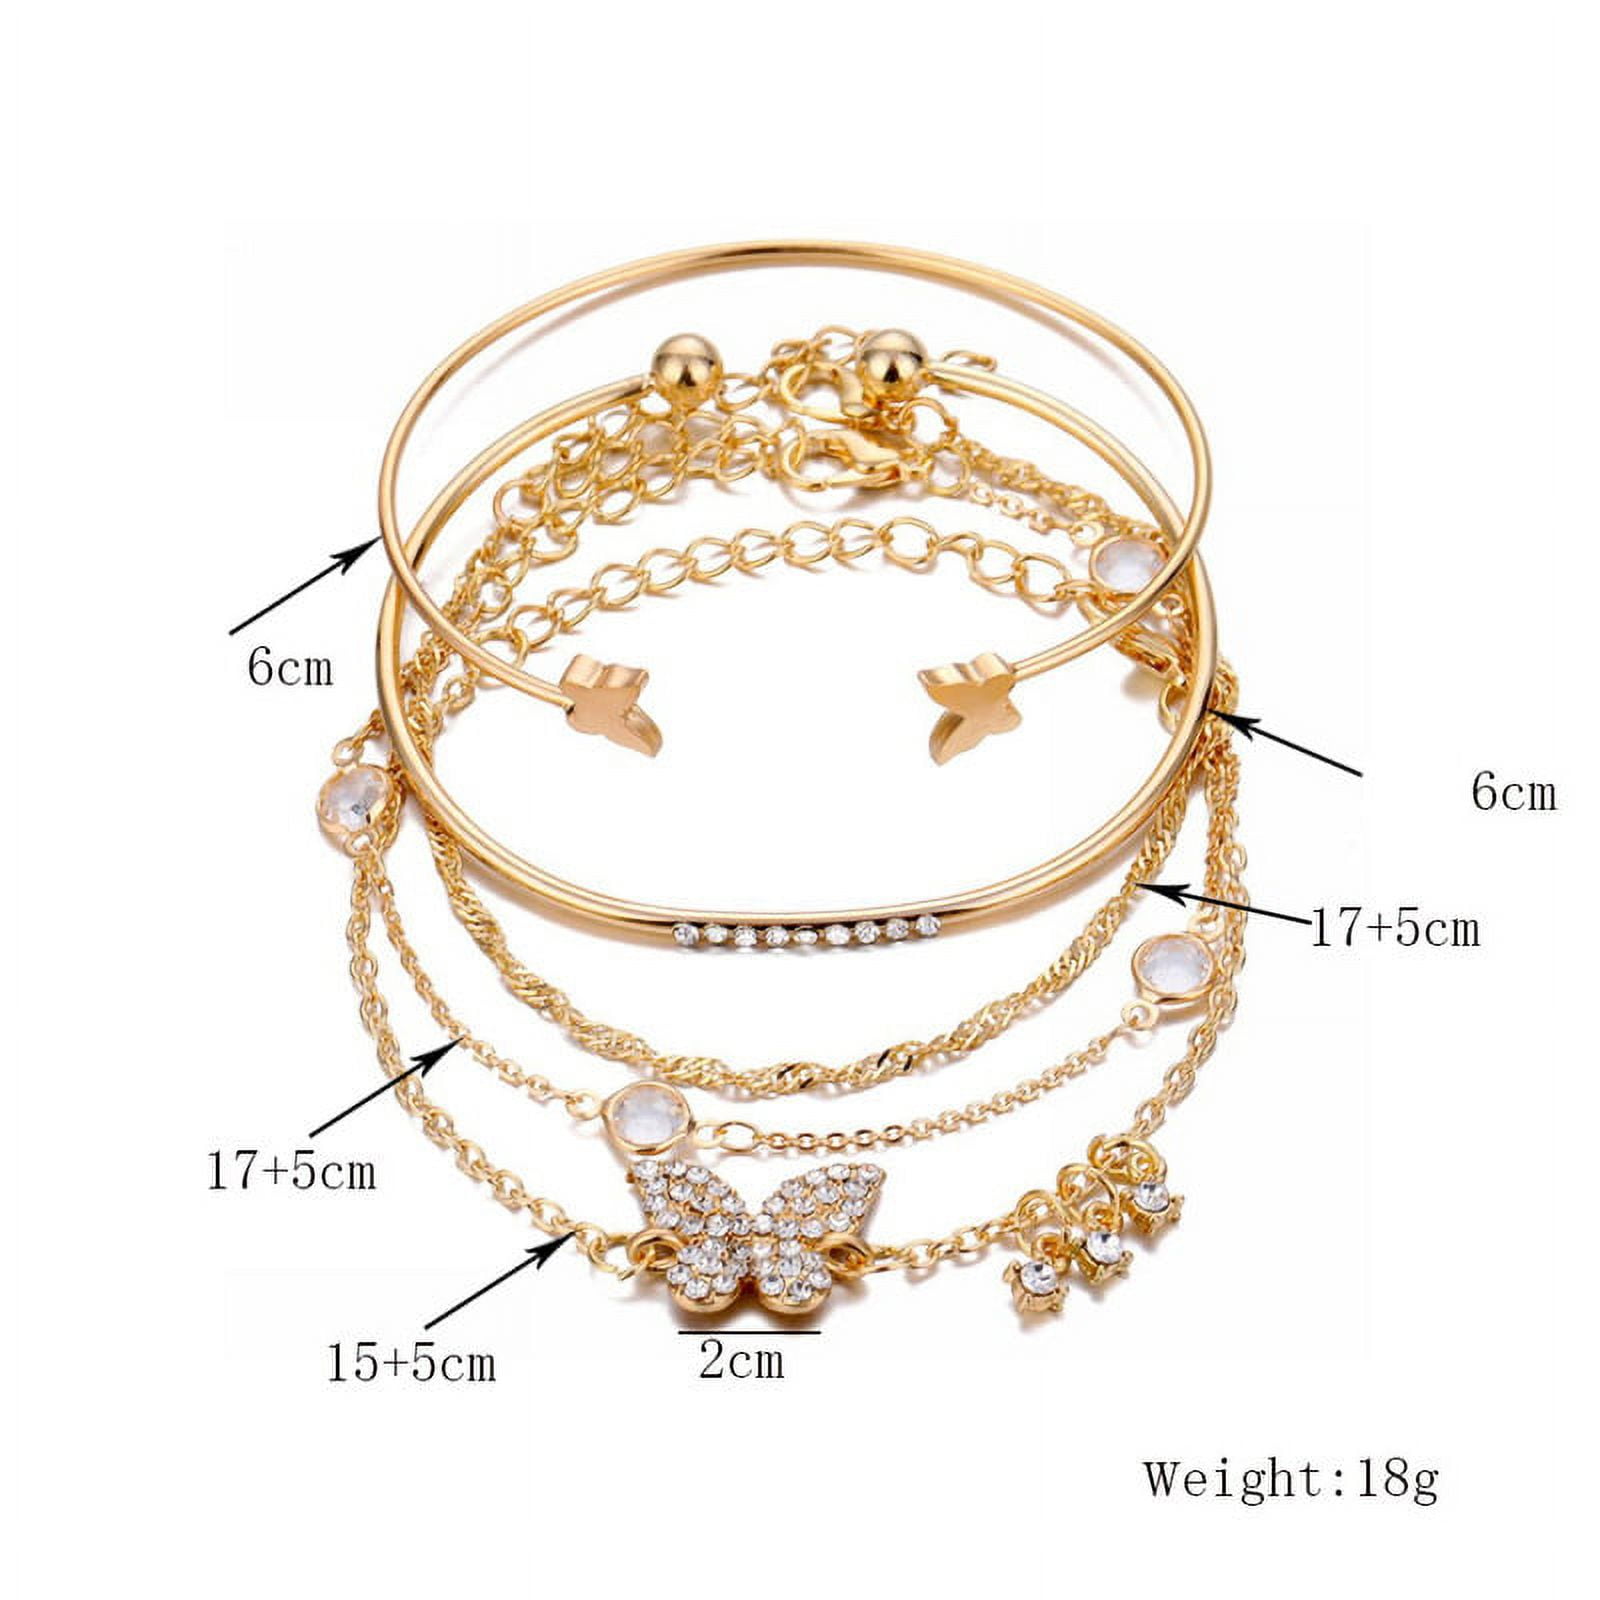 Bangle Bracelet Guide | With Clarity